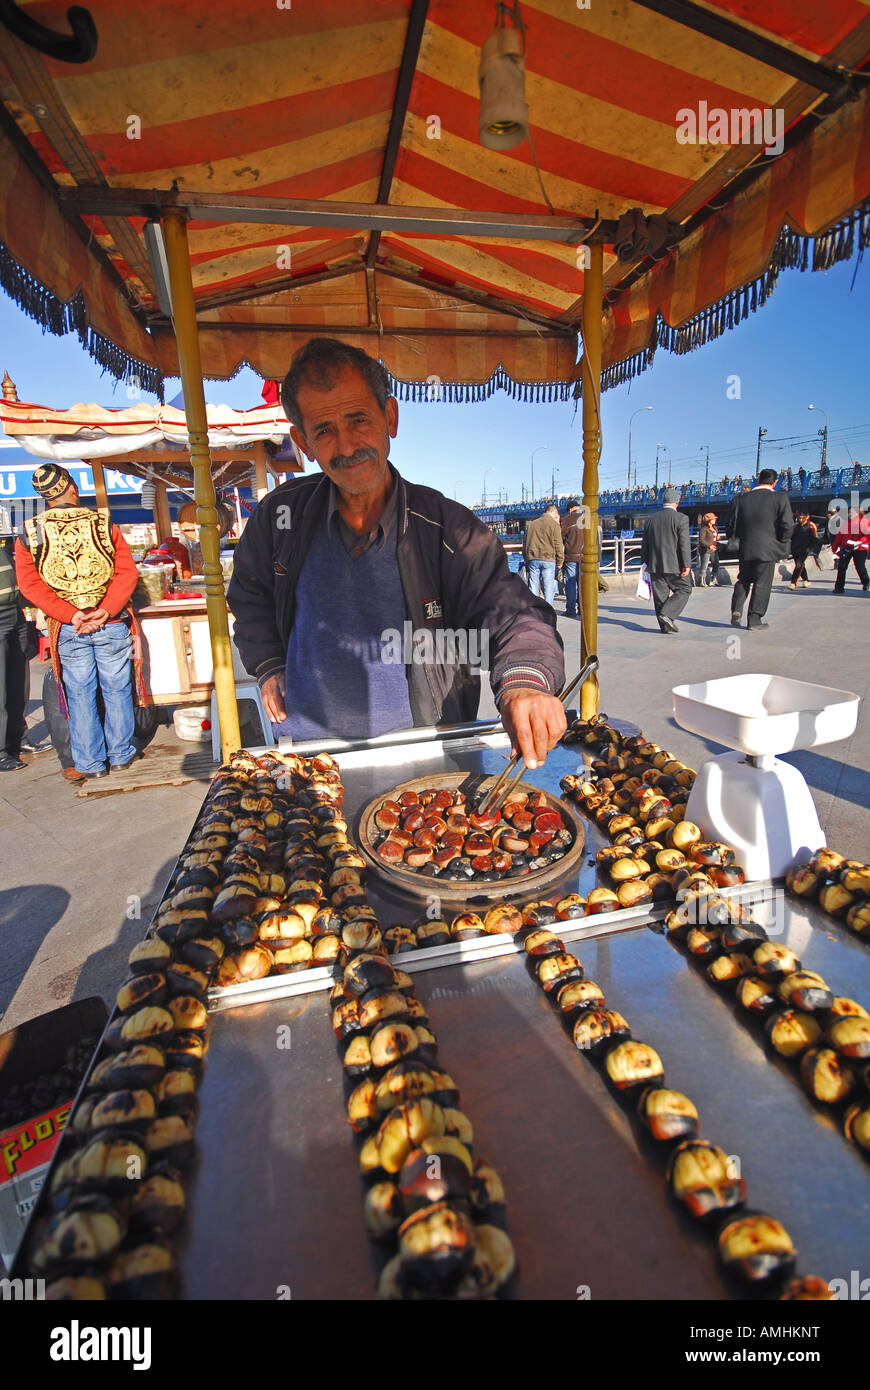 ISTANBUL. Man selling hot roast chestnuts by the Golden Horn waterfront in Eminonu. 2007. Stock Photo